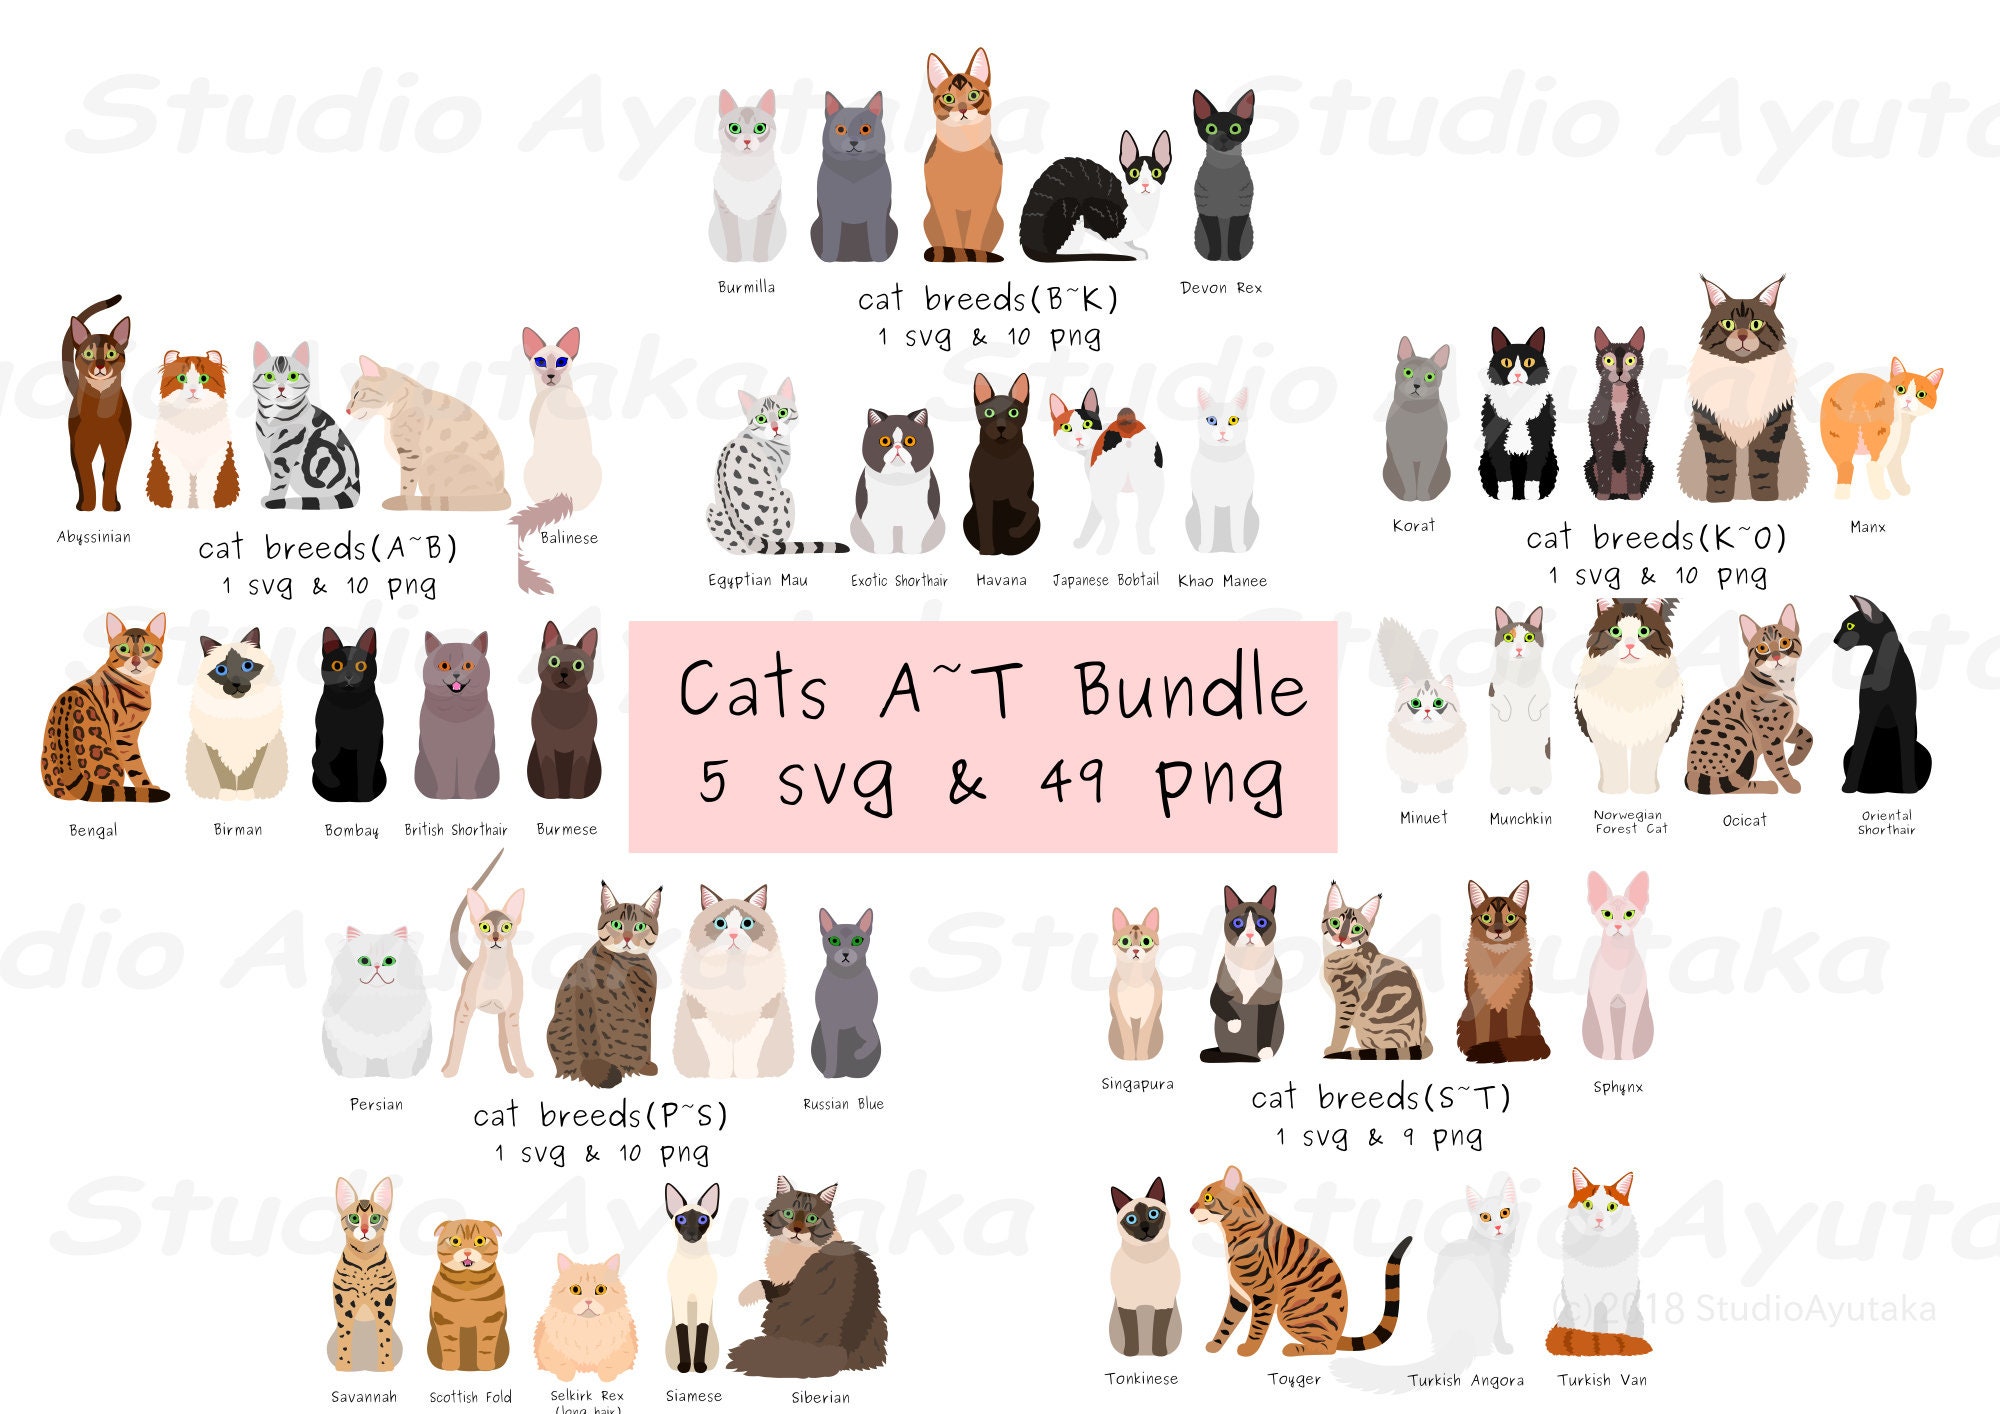 49 breeds of cats chart, svg, jpg, png, 16*20